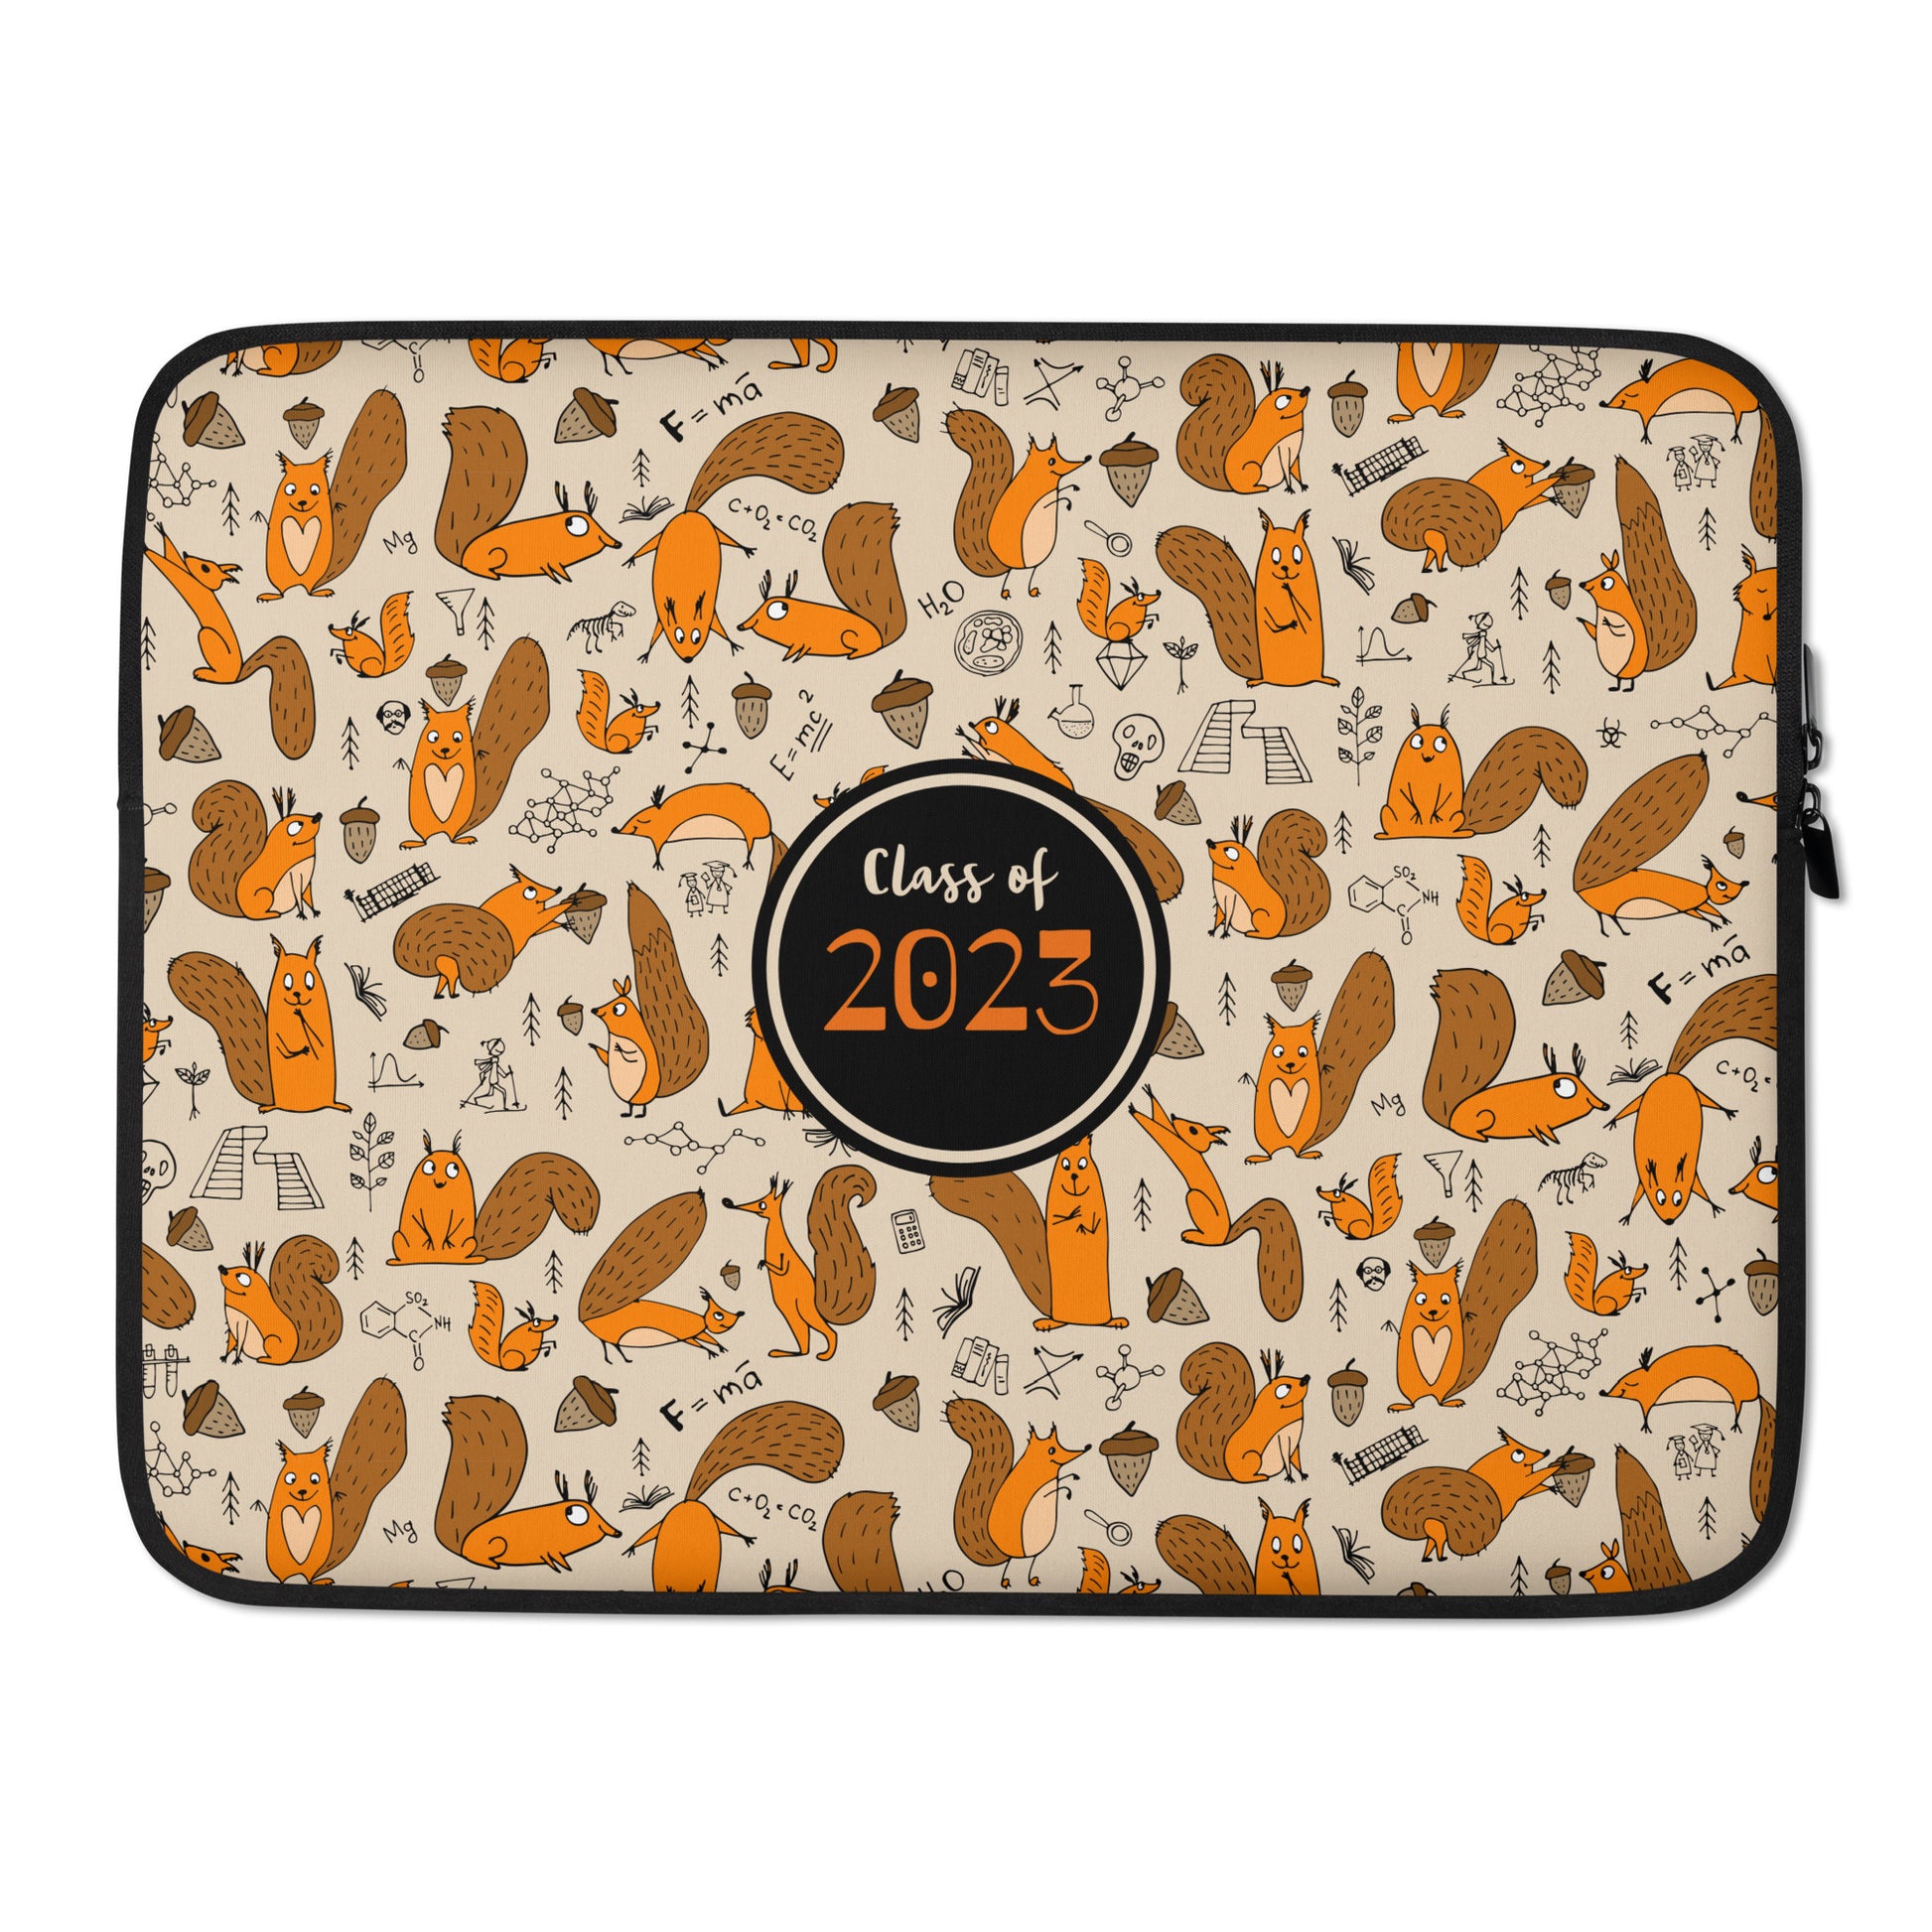 Laptop sleeve with funny science squirrels and personalised text 